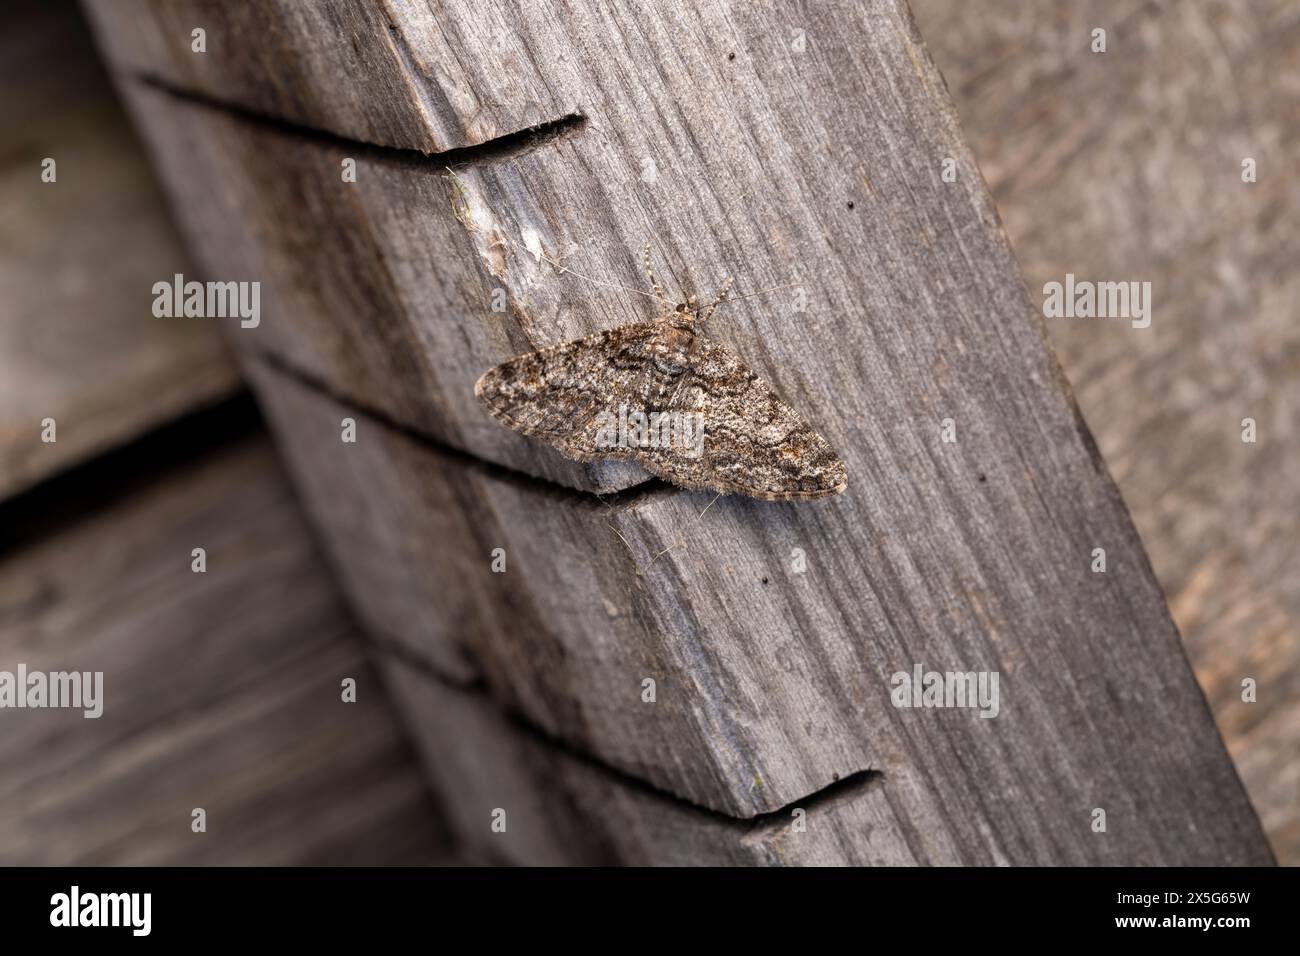 Cleora cinctaria Family Geometridae Genus Cleora Ringed carpet moth wild nature insect photography, picture, wallpaper Stock Photo